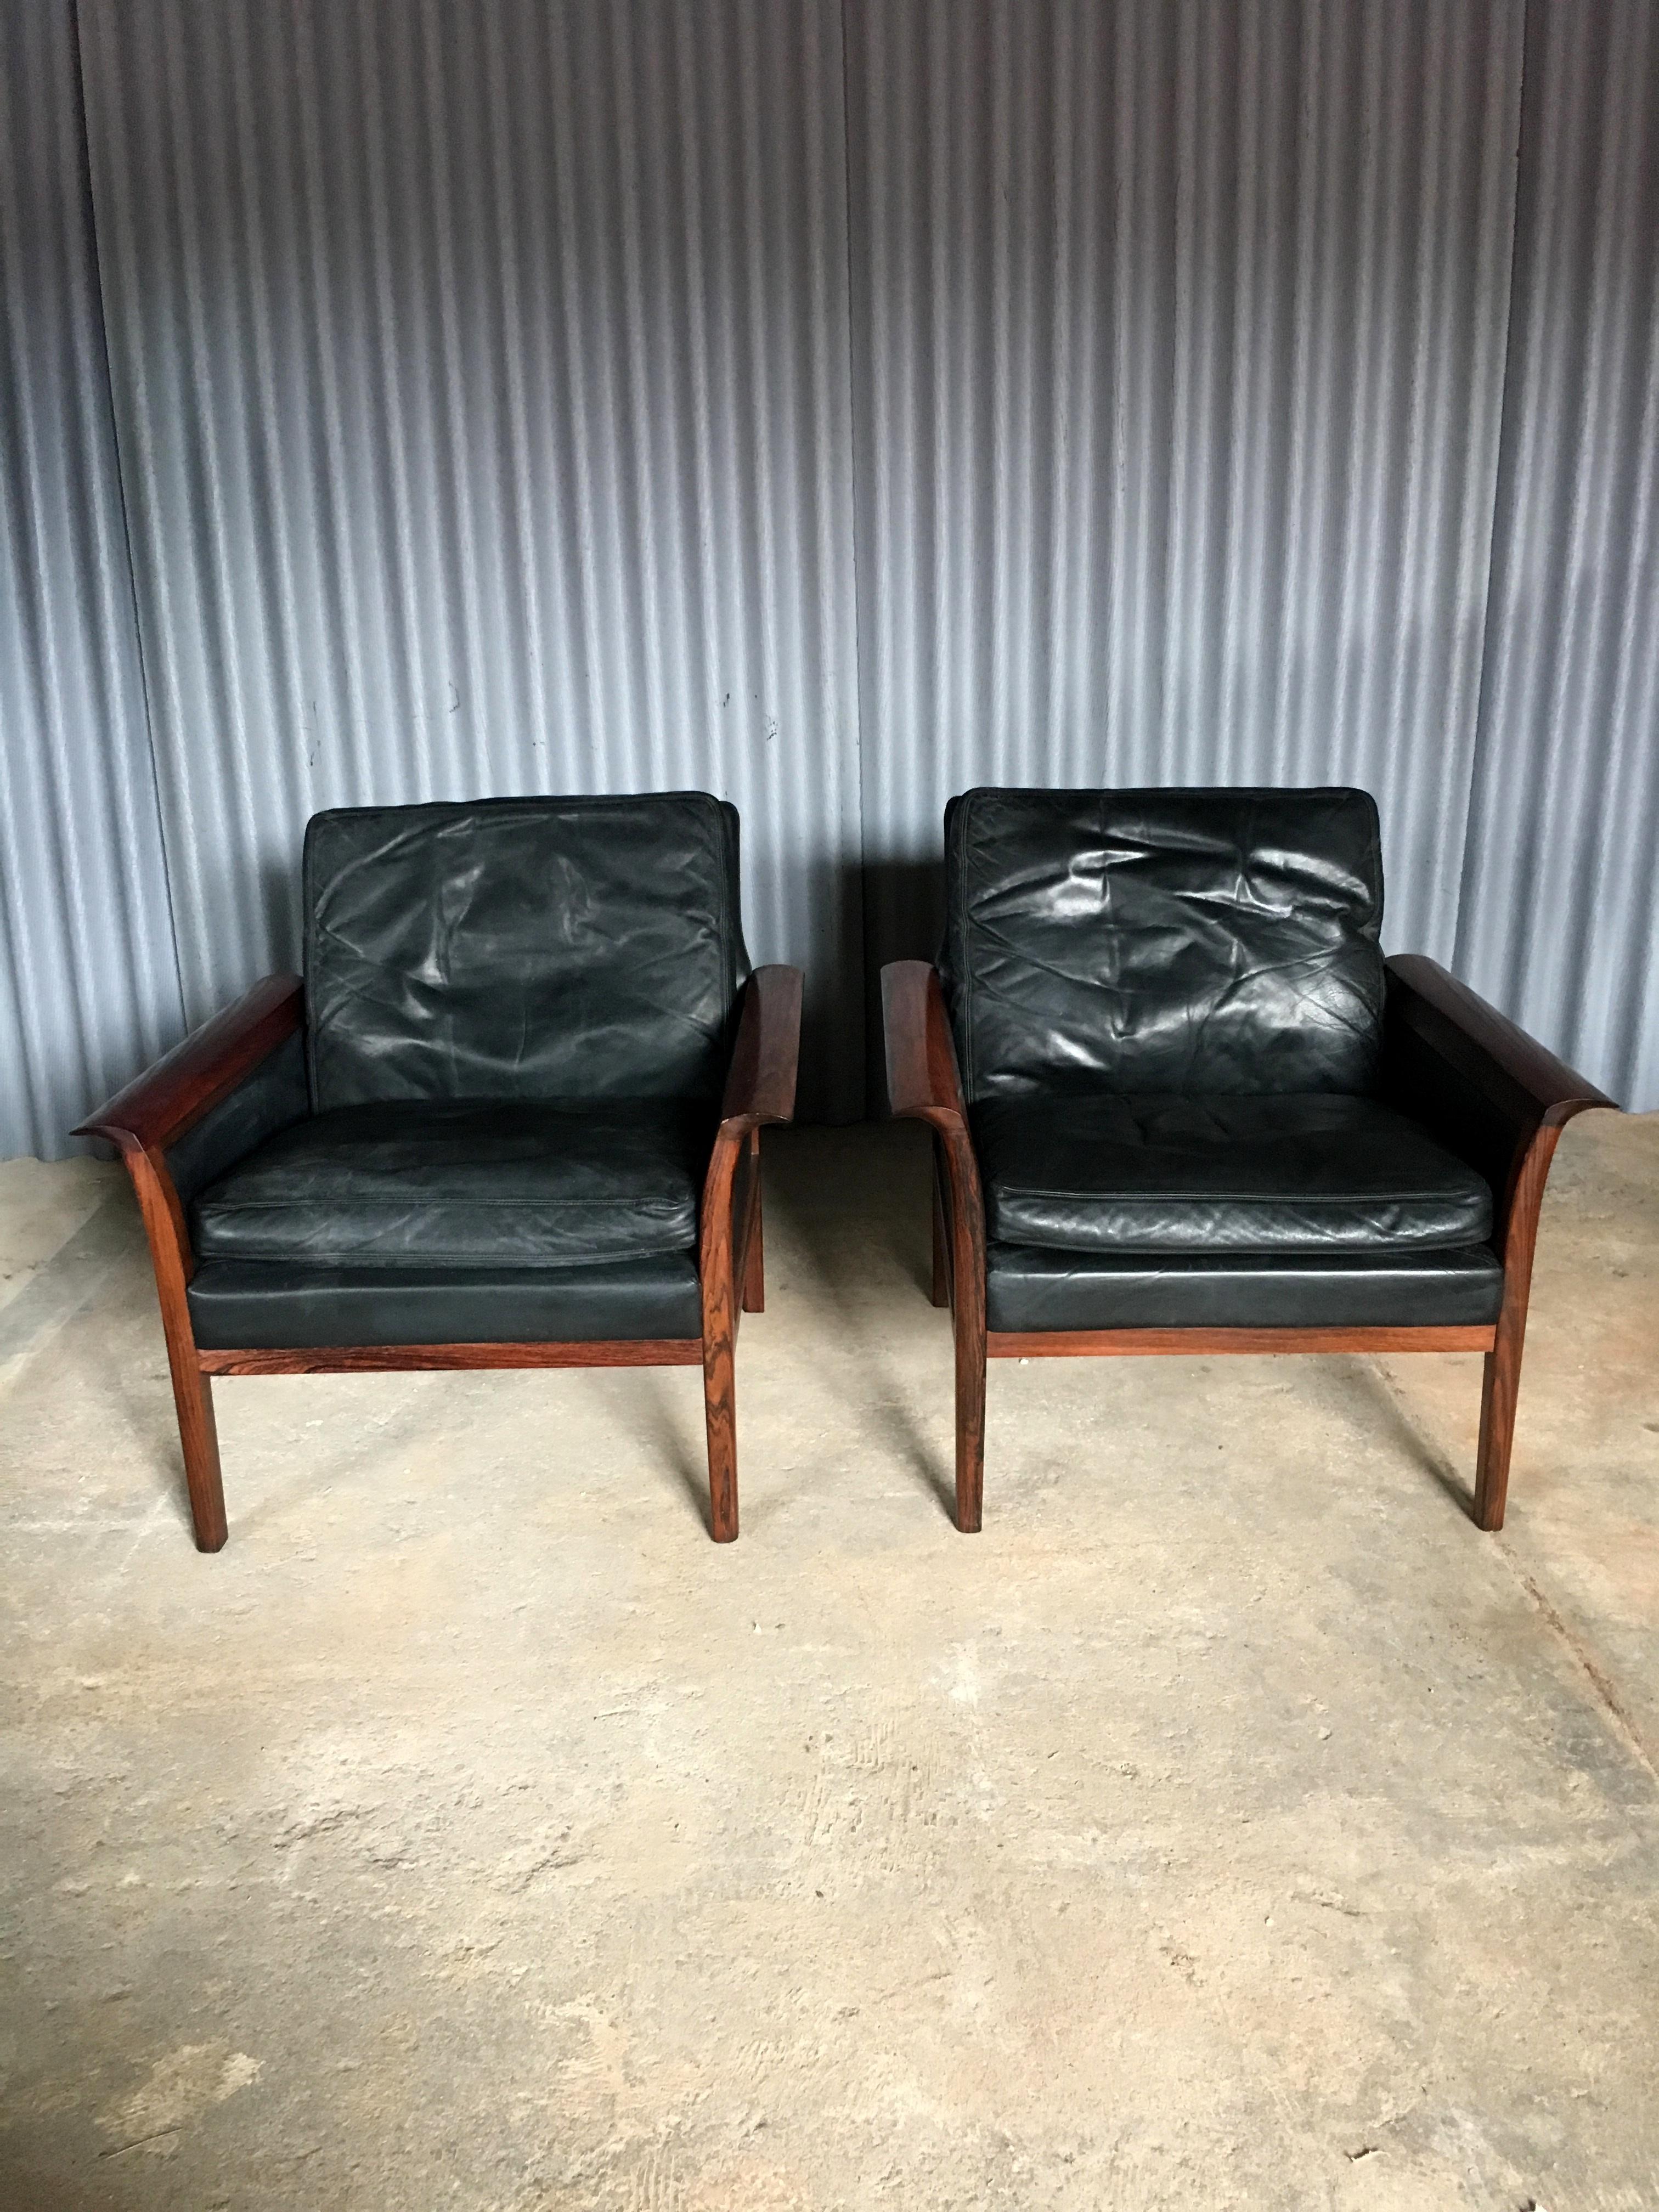 Handsome pair of chairs by Designer Knut Saeter for Vatner Mobler.
Each chair is in beautiful condition with no rips or tears to the leather. Leather is aged, as normal, and we conditioned it.
Rosewood frame is in excellent condition and the